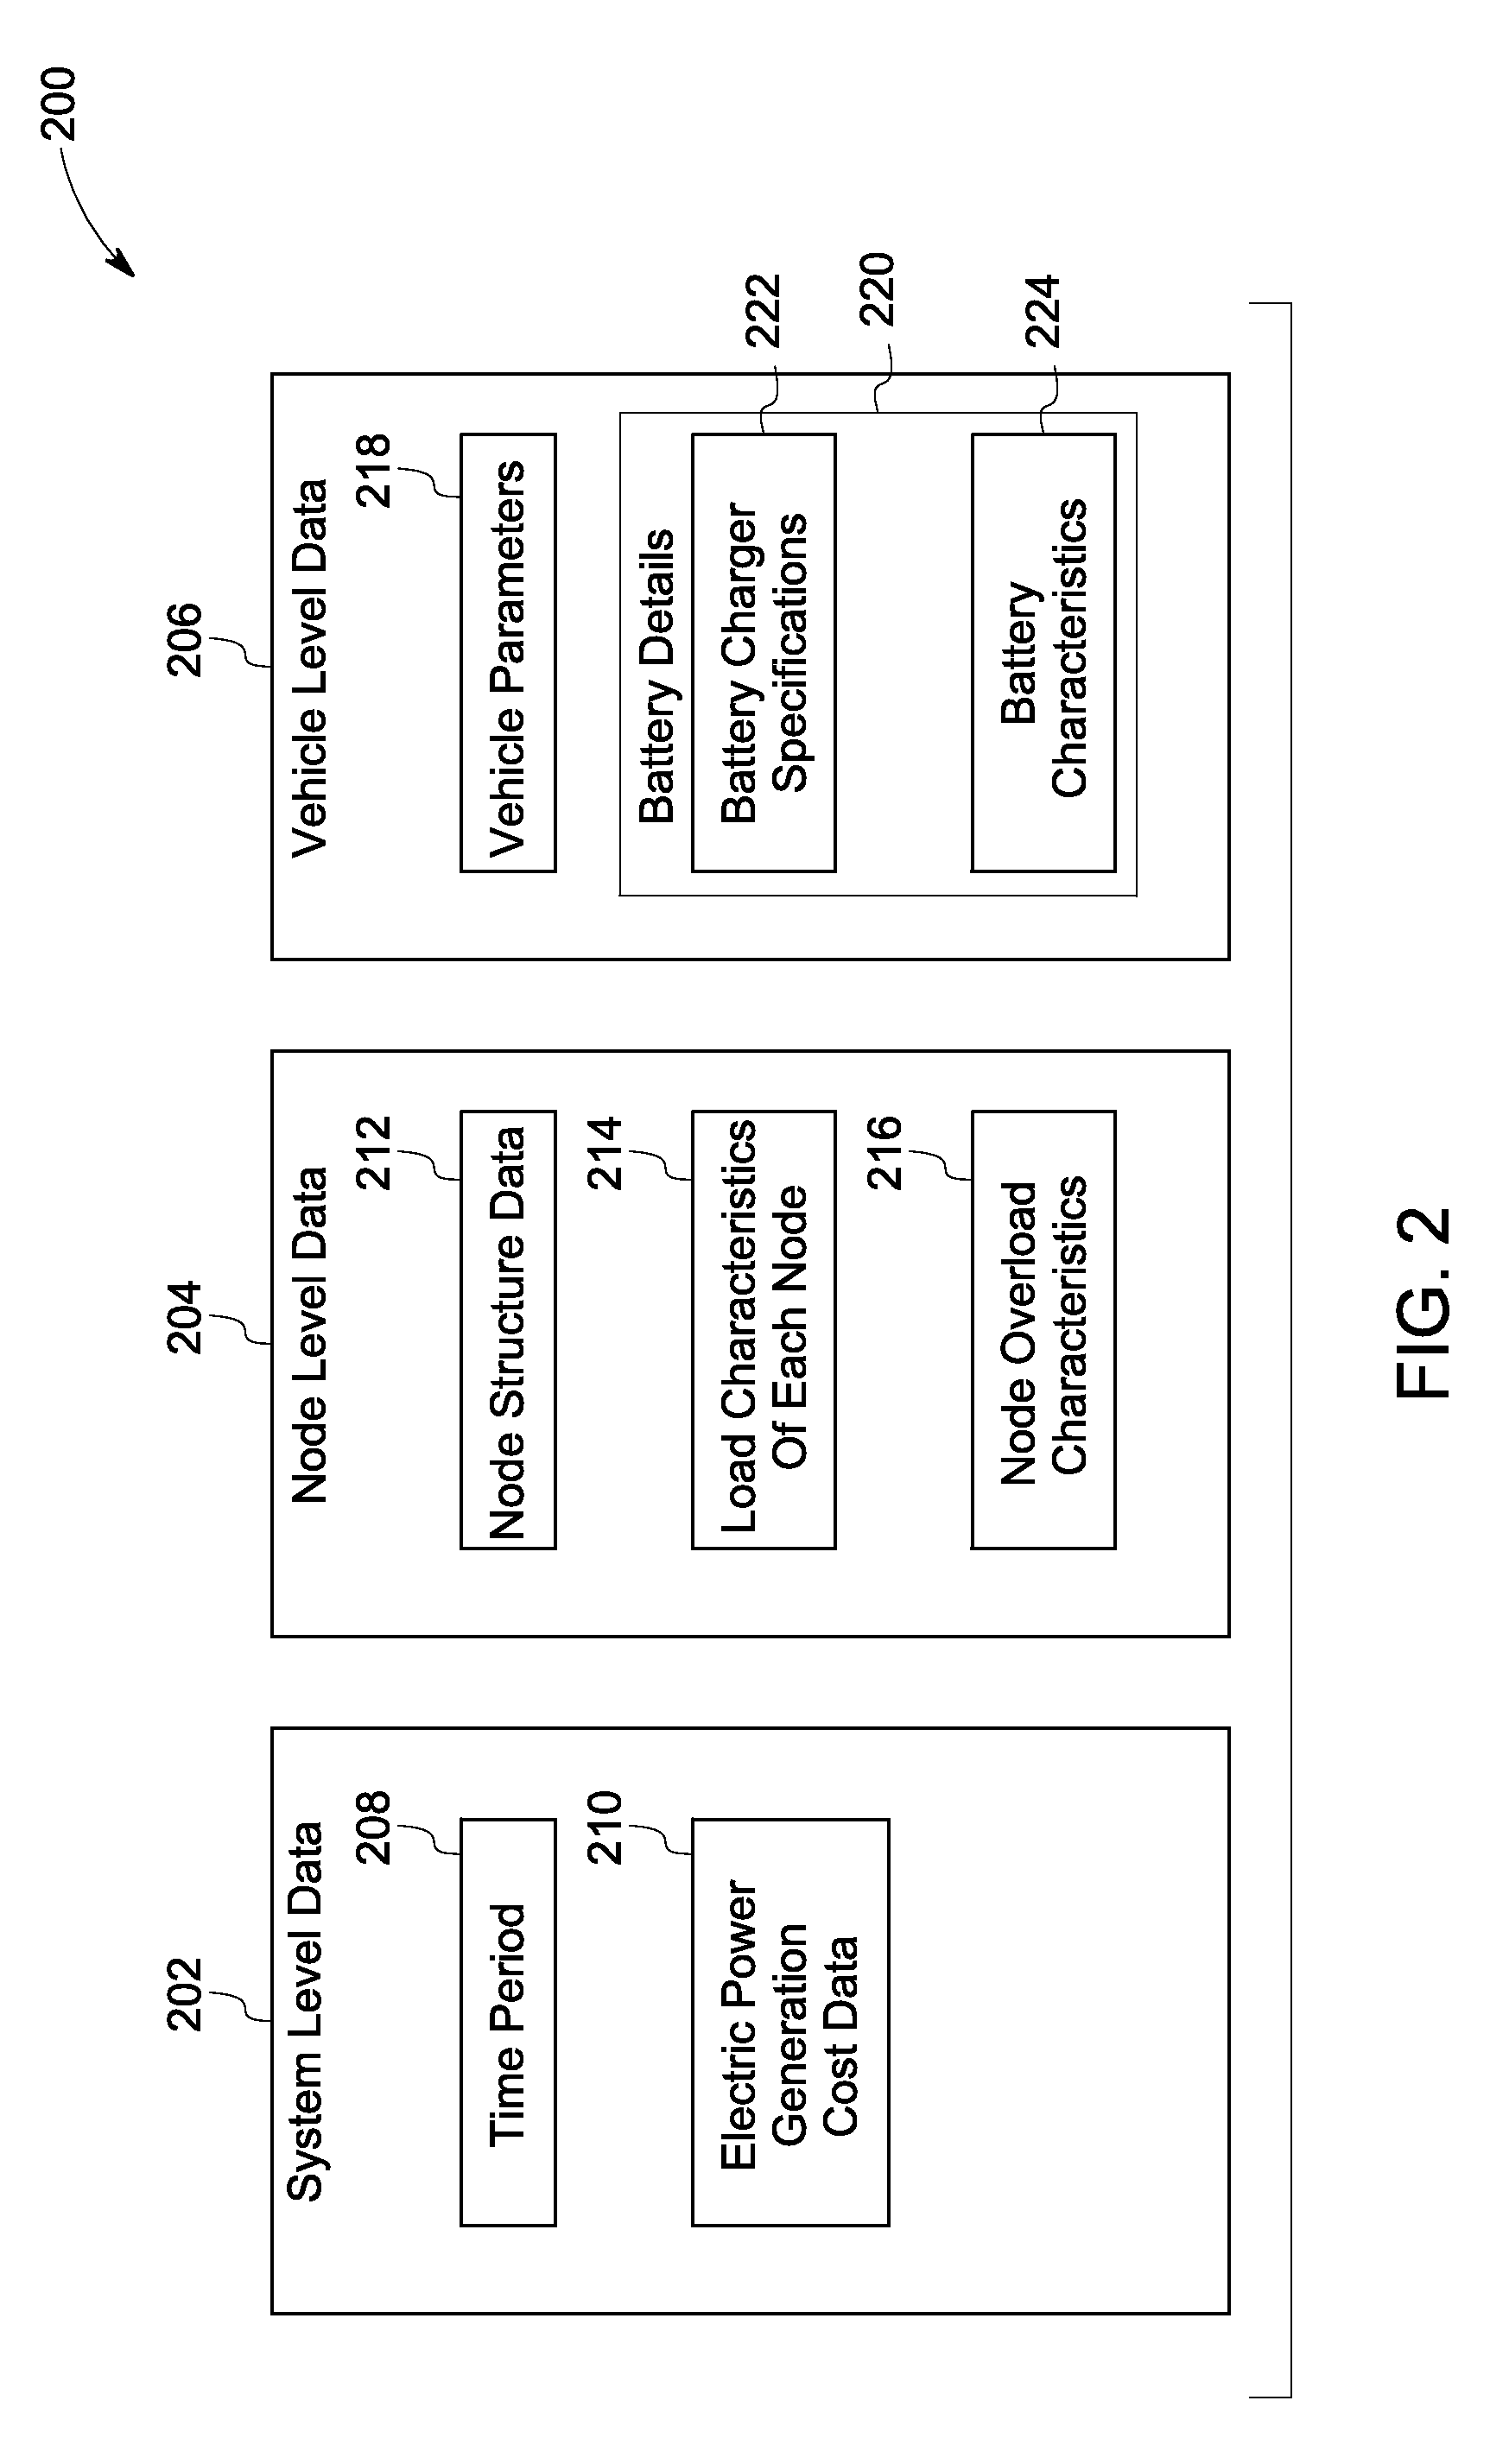 System and method for optimal load planning of electric vehicle charging